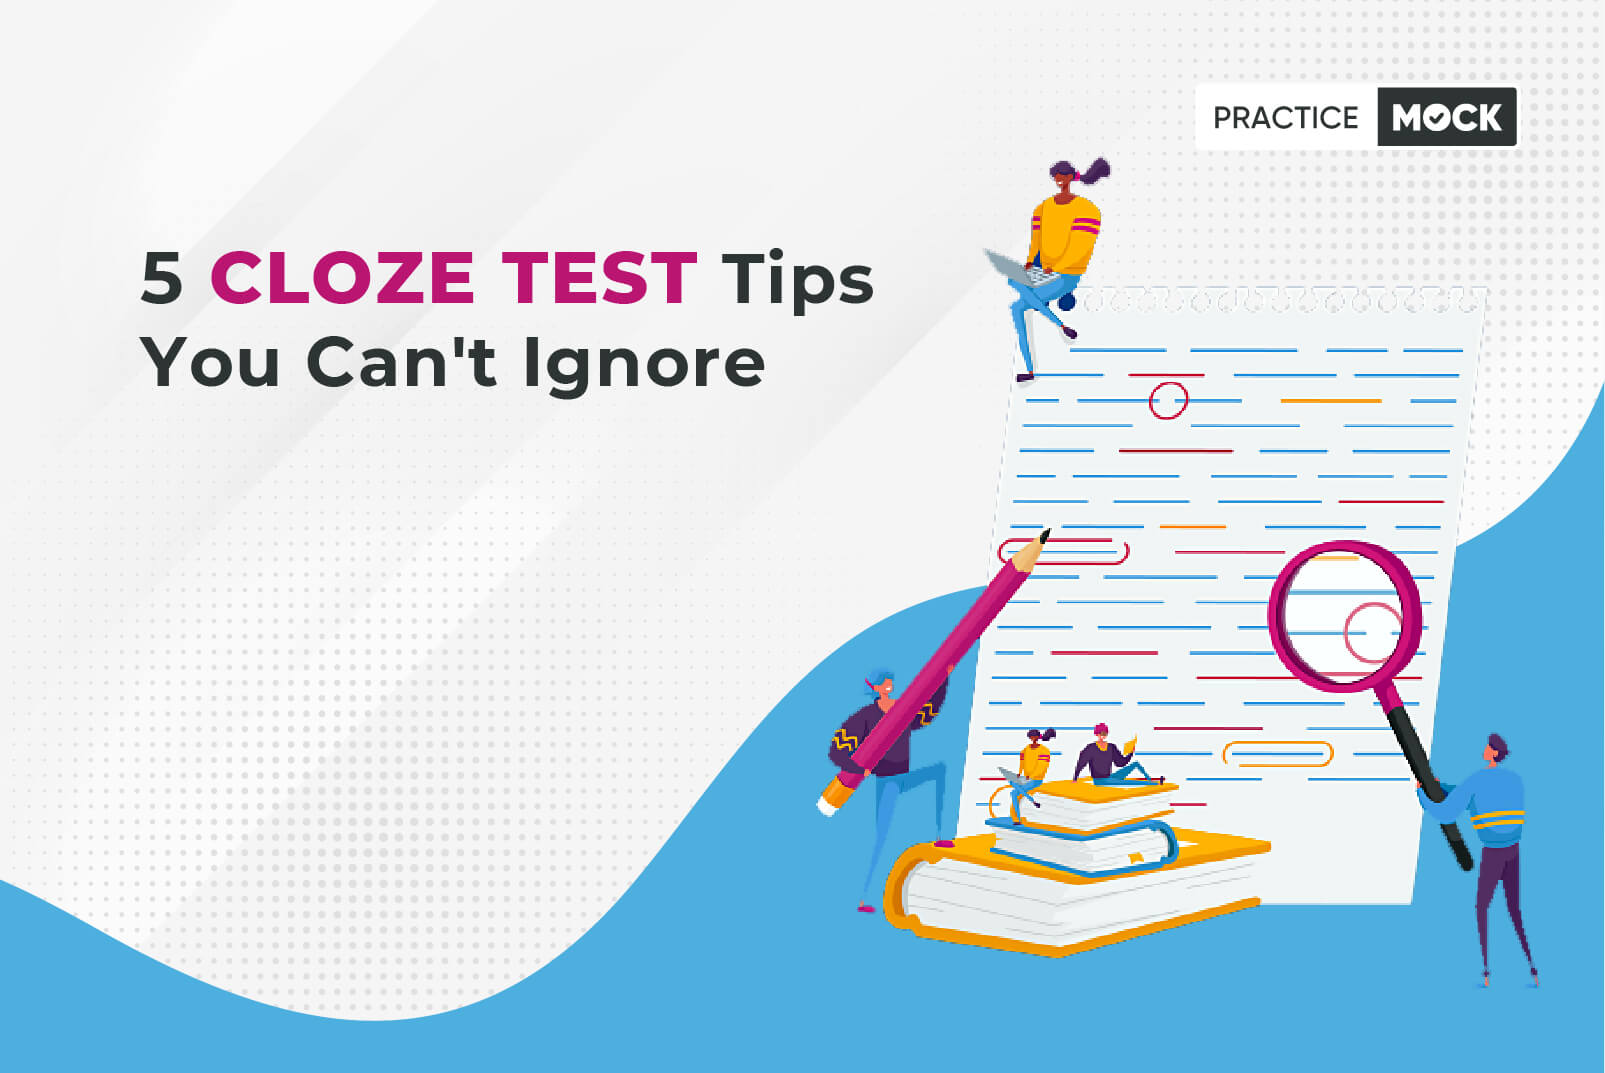 5 Cloze Test Tips You Can't Ignore